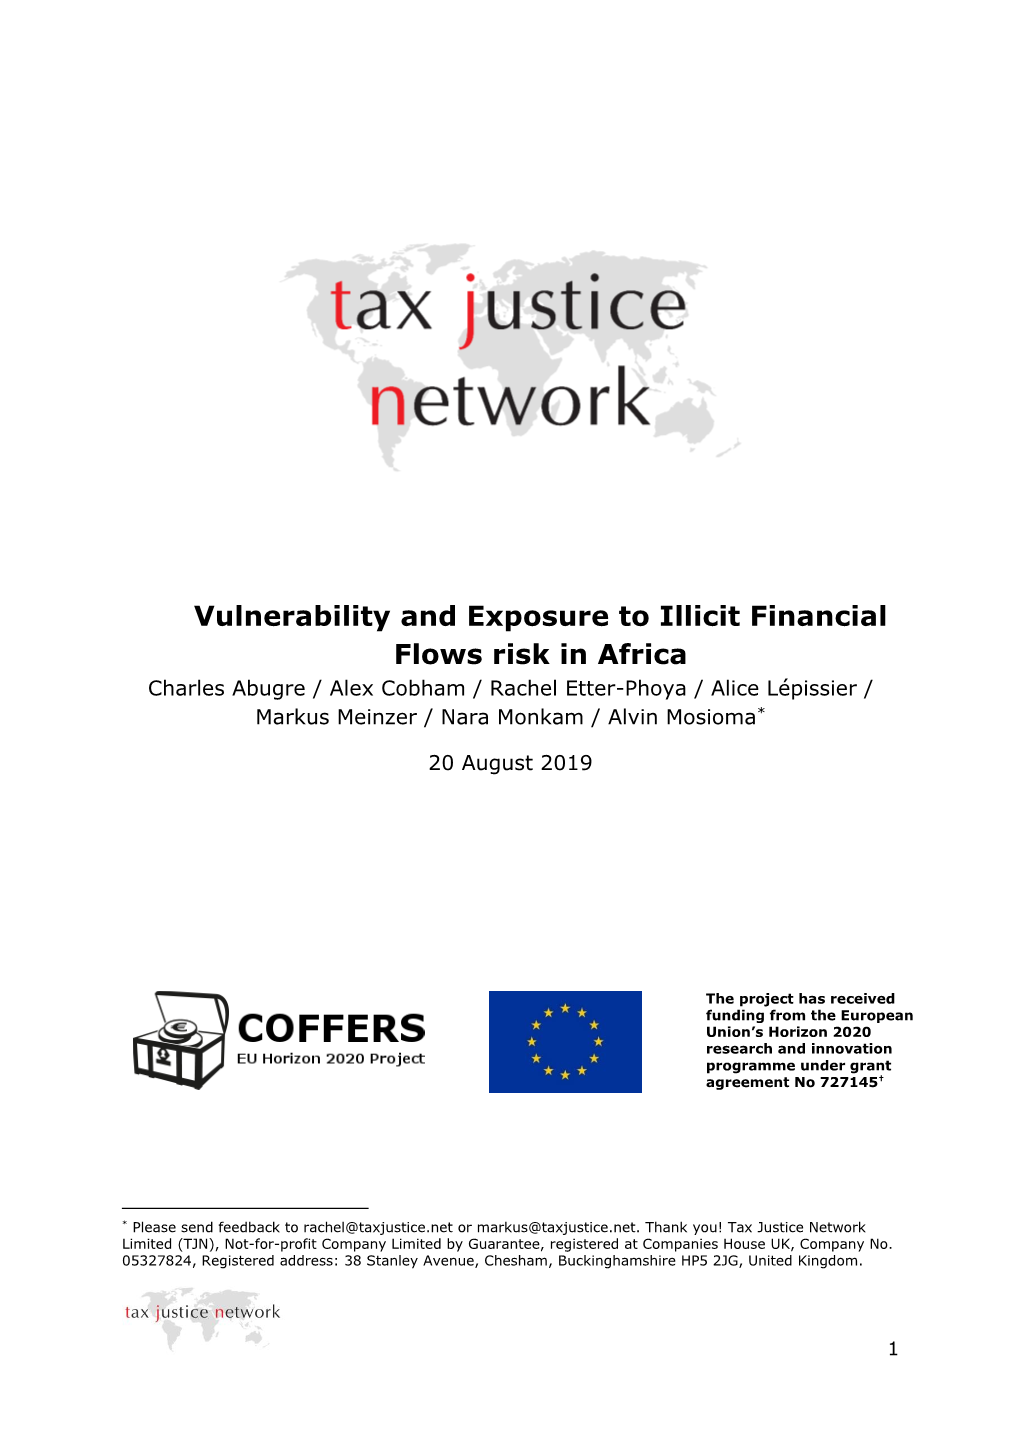 Vulnerability and Exposure to Illicit Financial Flows Risk in Africa